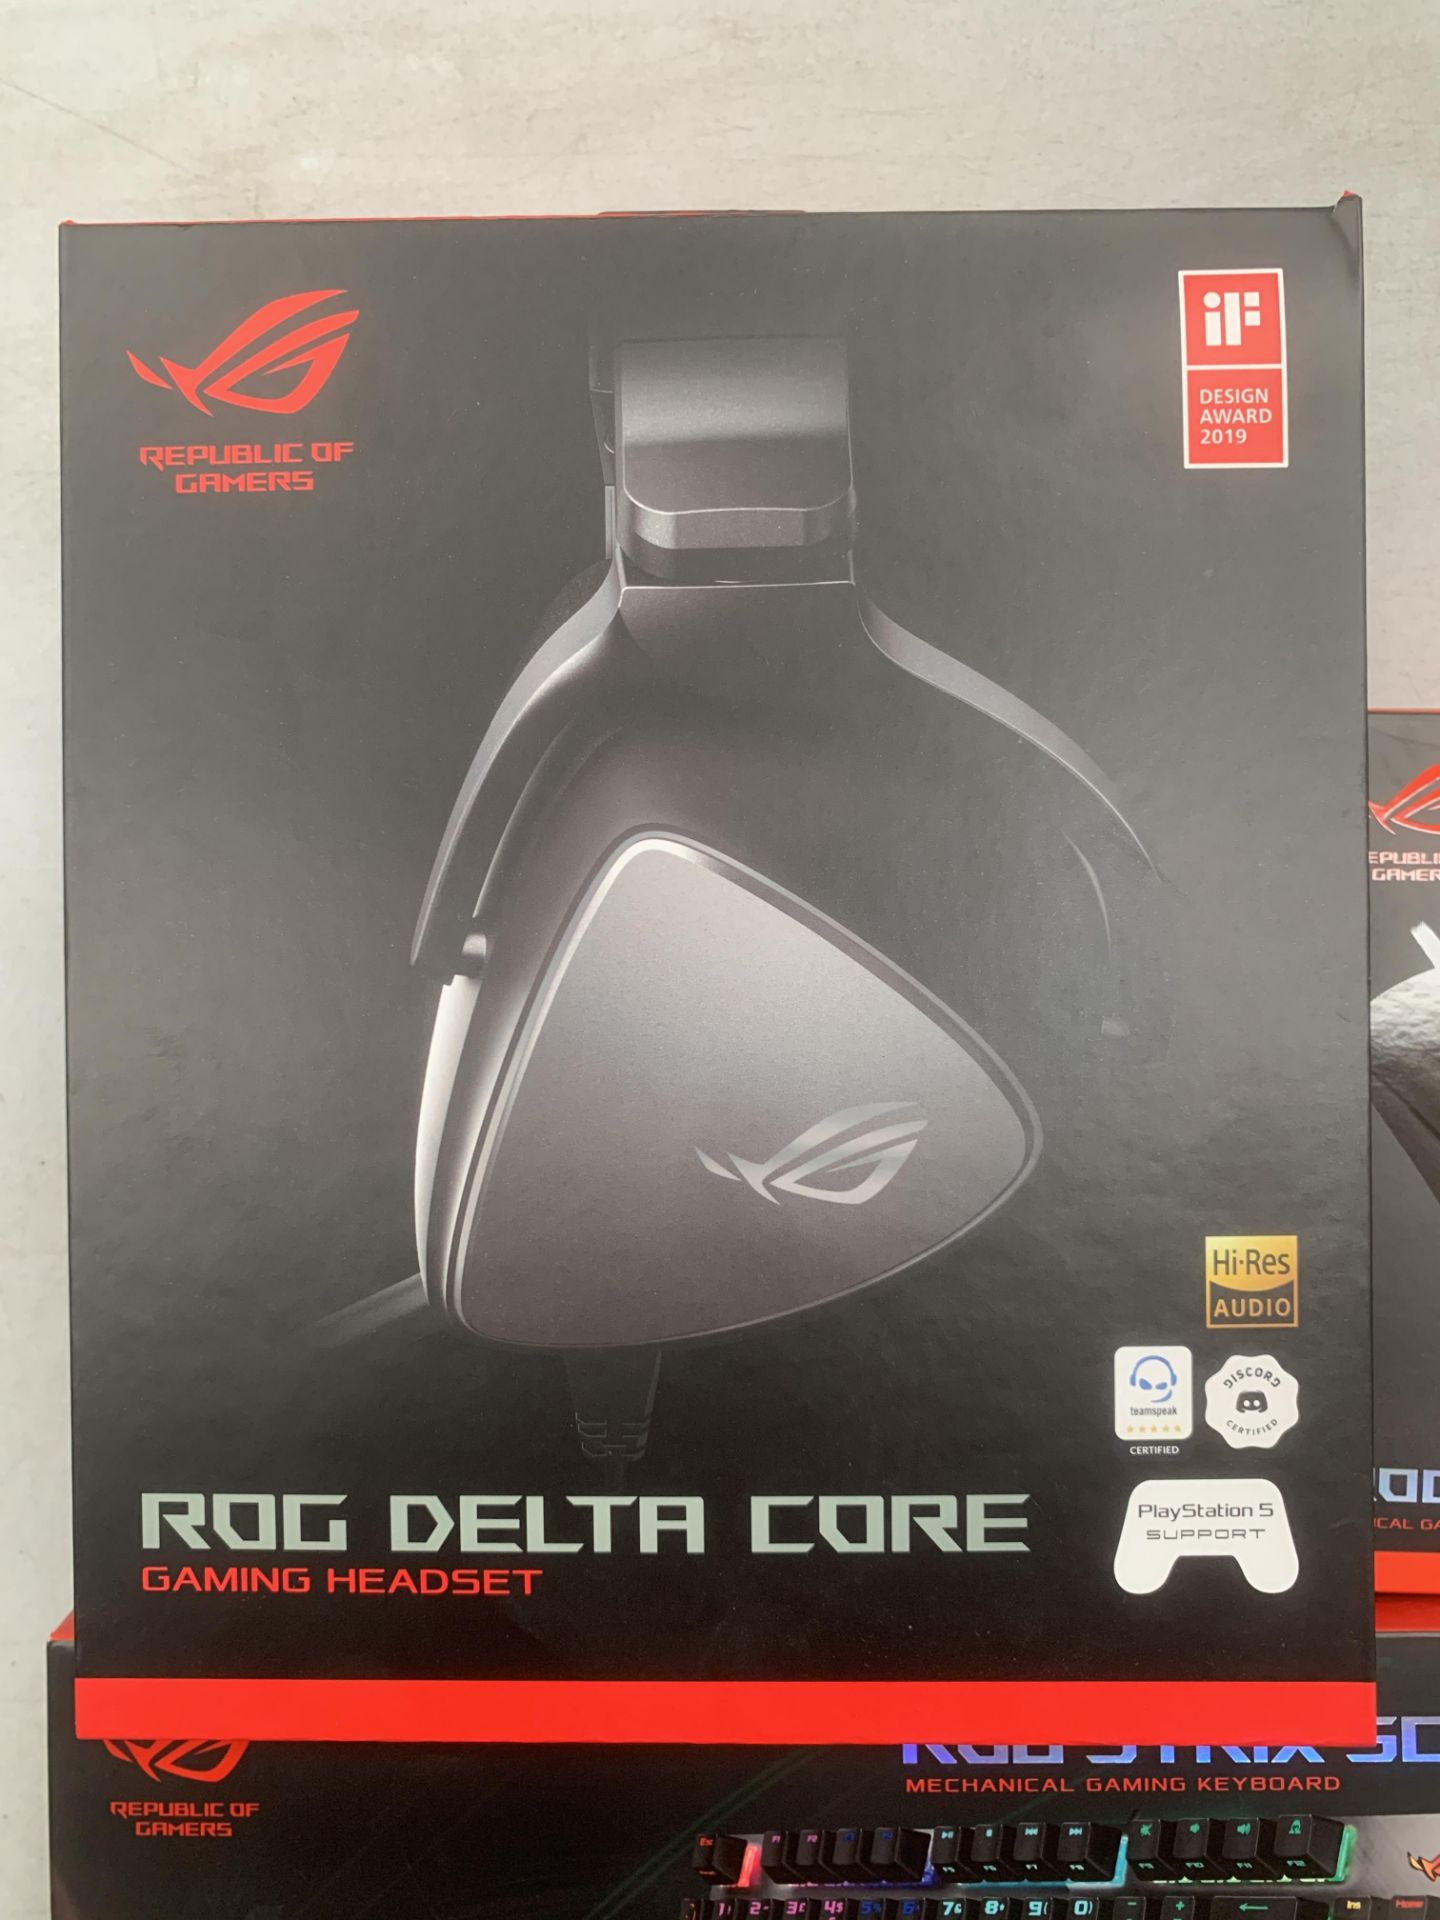 Asus Republic of Gamers Mouse, Keyboard, Desk Sheath and headset - all boxed - Image 2 of 7